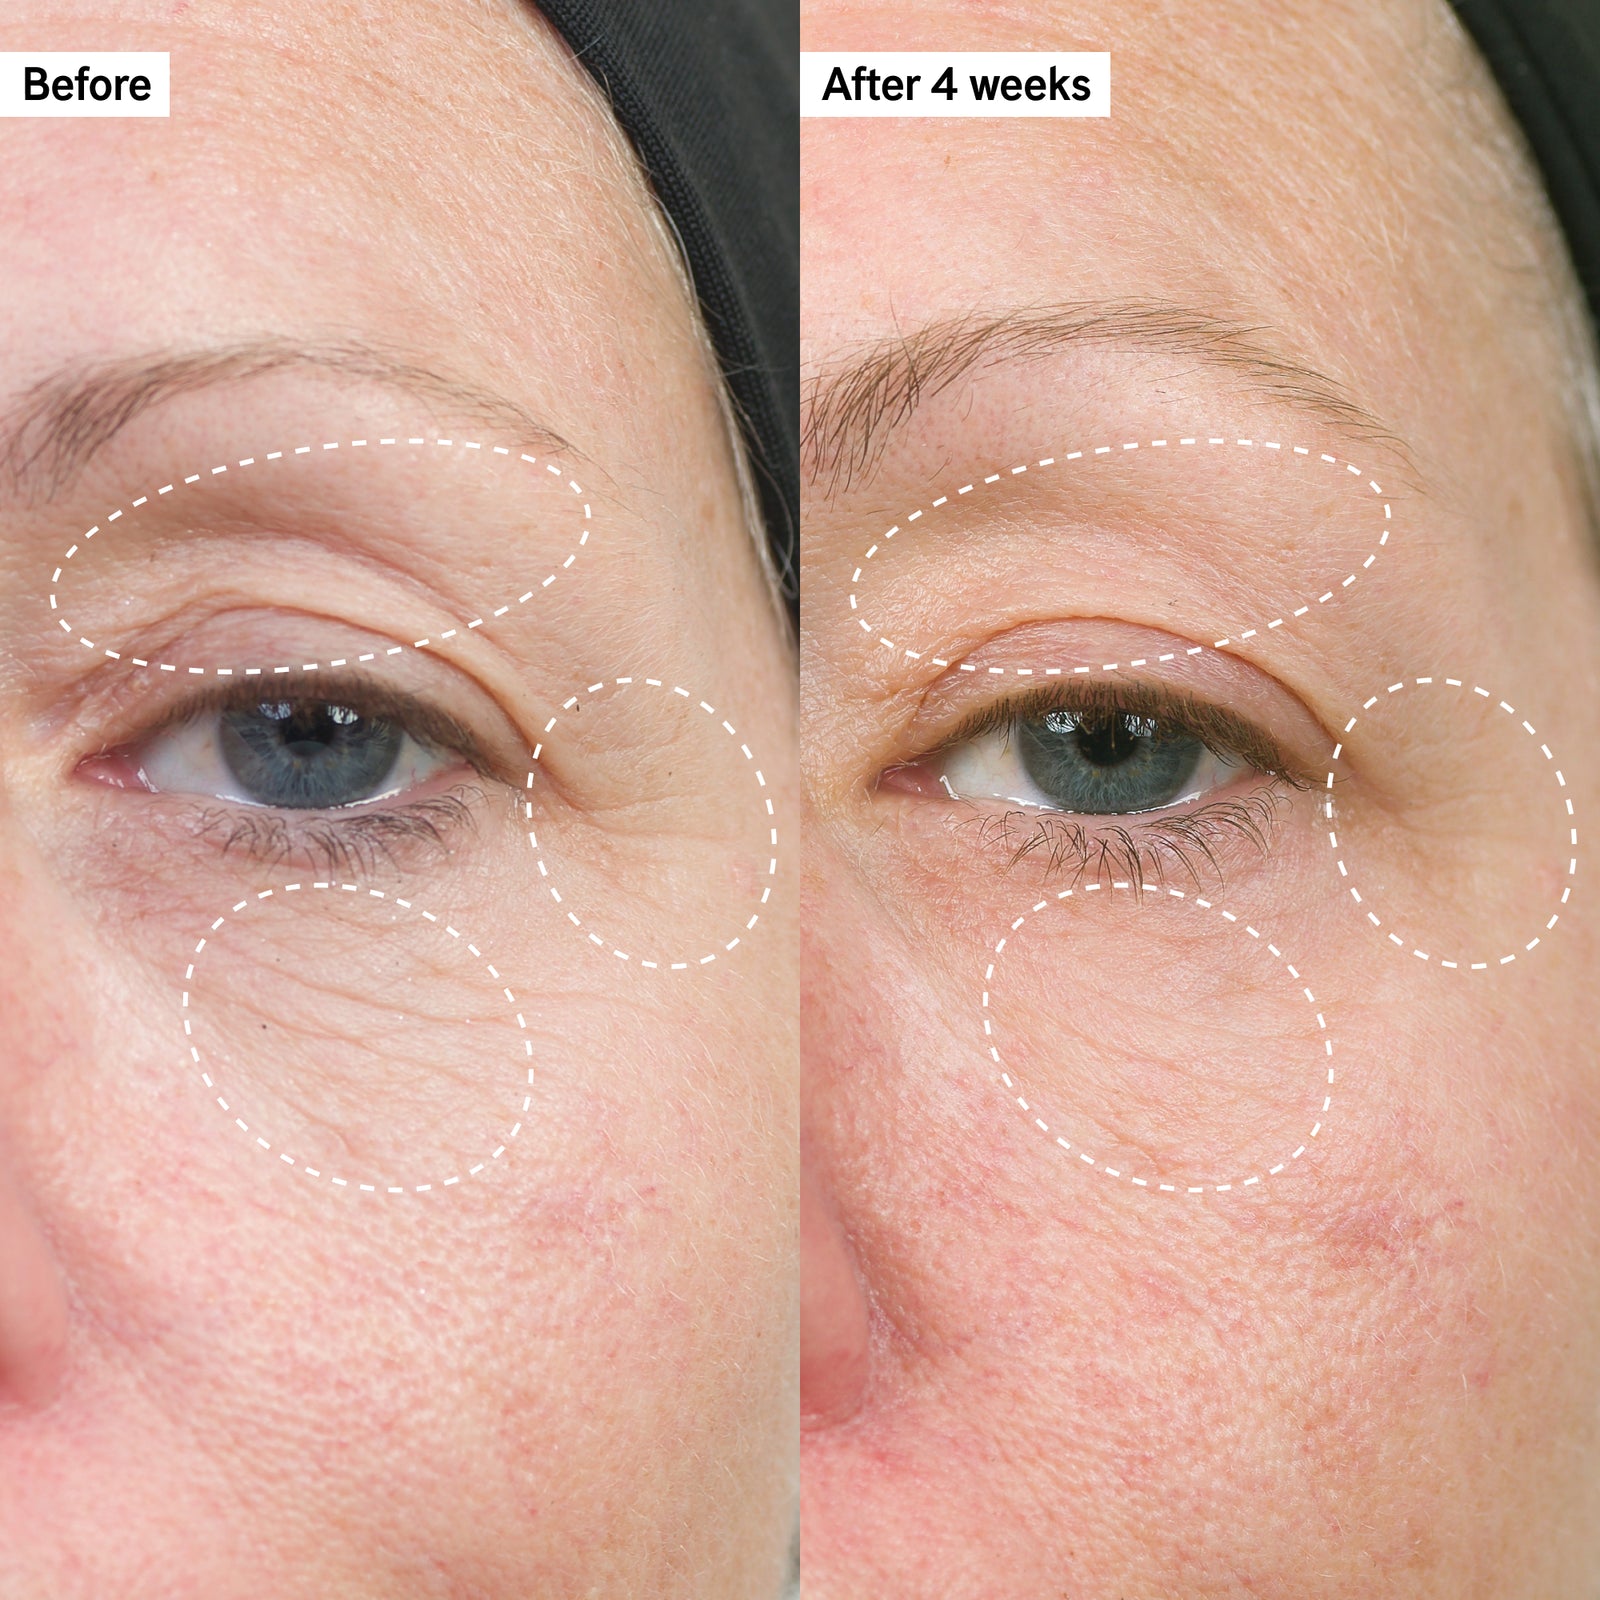 Before and after showing significant eye wrinkle reduction